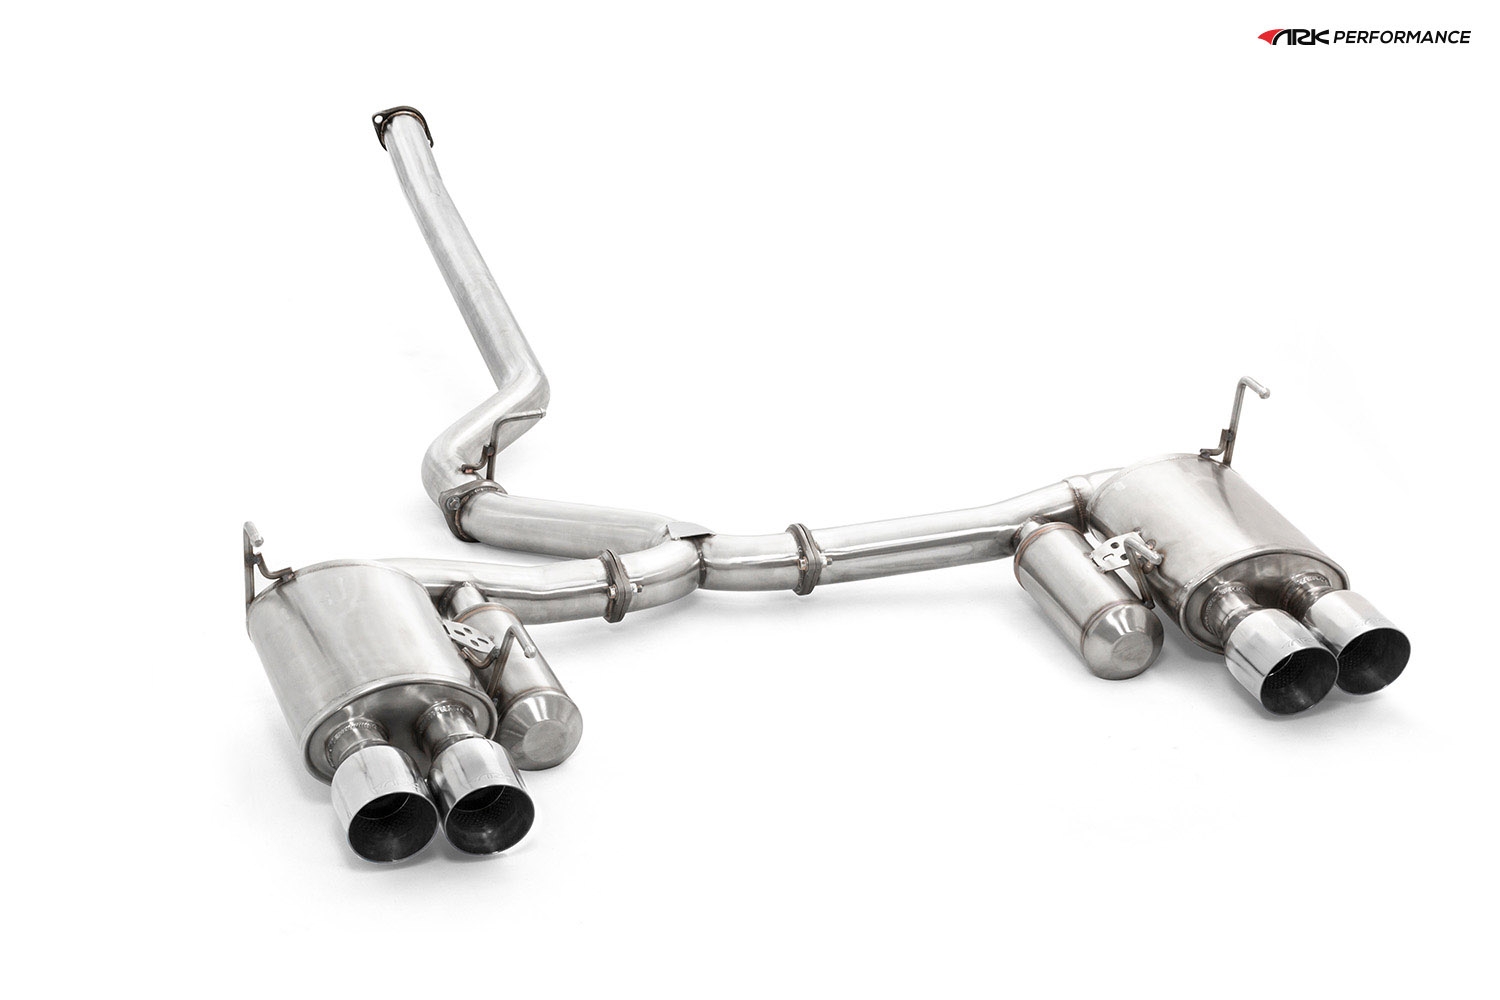 Ark Performance Stainless Steel DT-S Cat-Back Exhaust System 3.0in Pipe w/ 4.0 Polished Quad Tip, Dual Exit - Subaru WRX / STI Sedan 15+ 2.5L H4 TURBO GR / VA